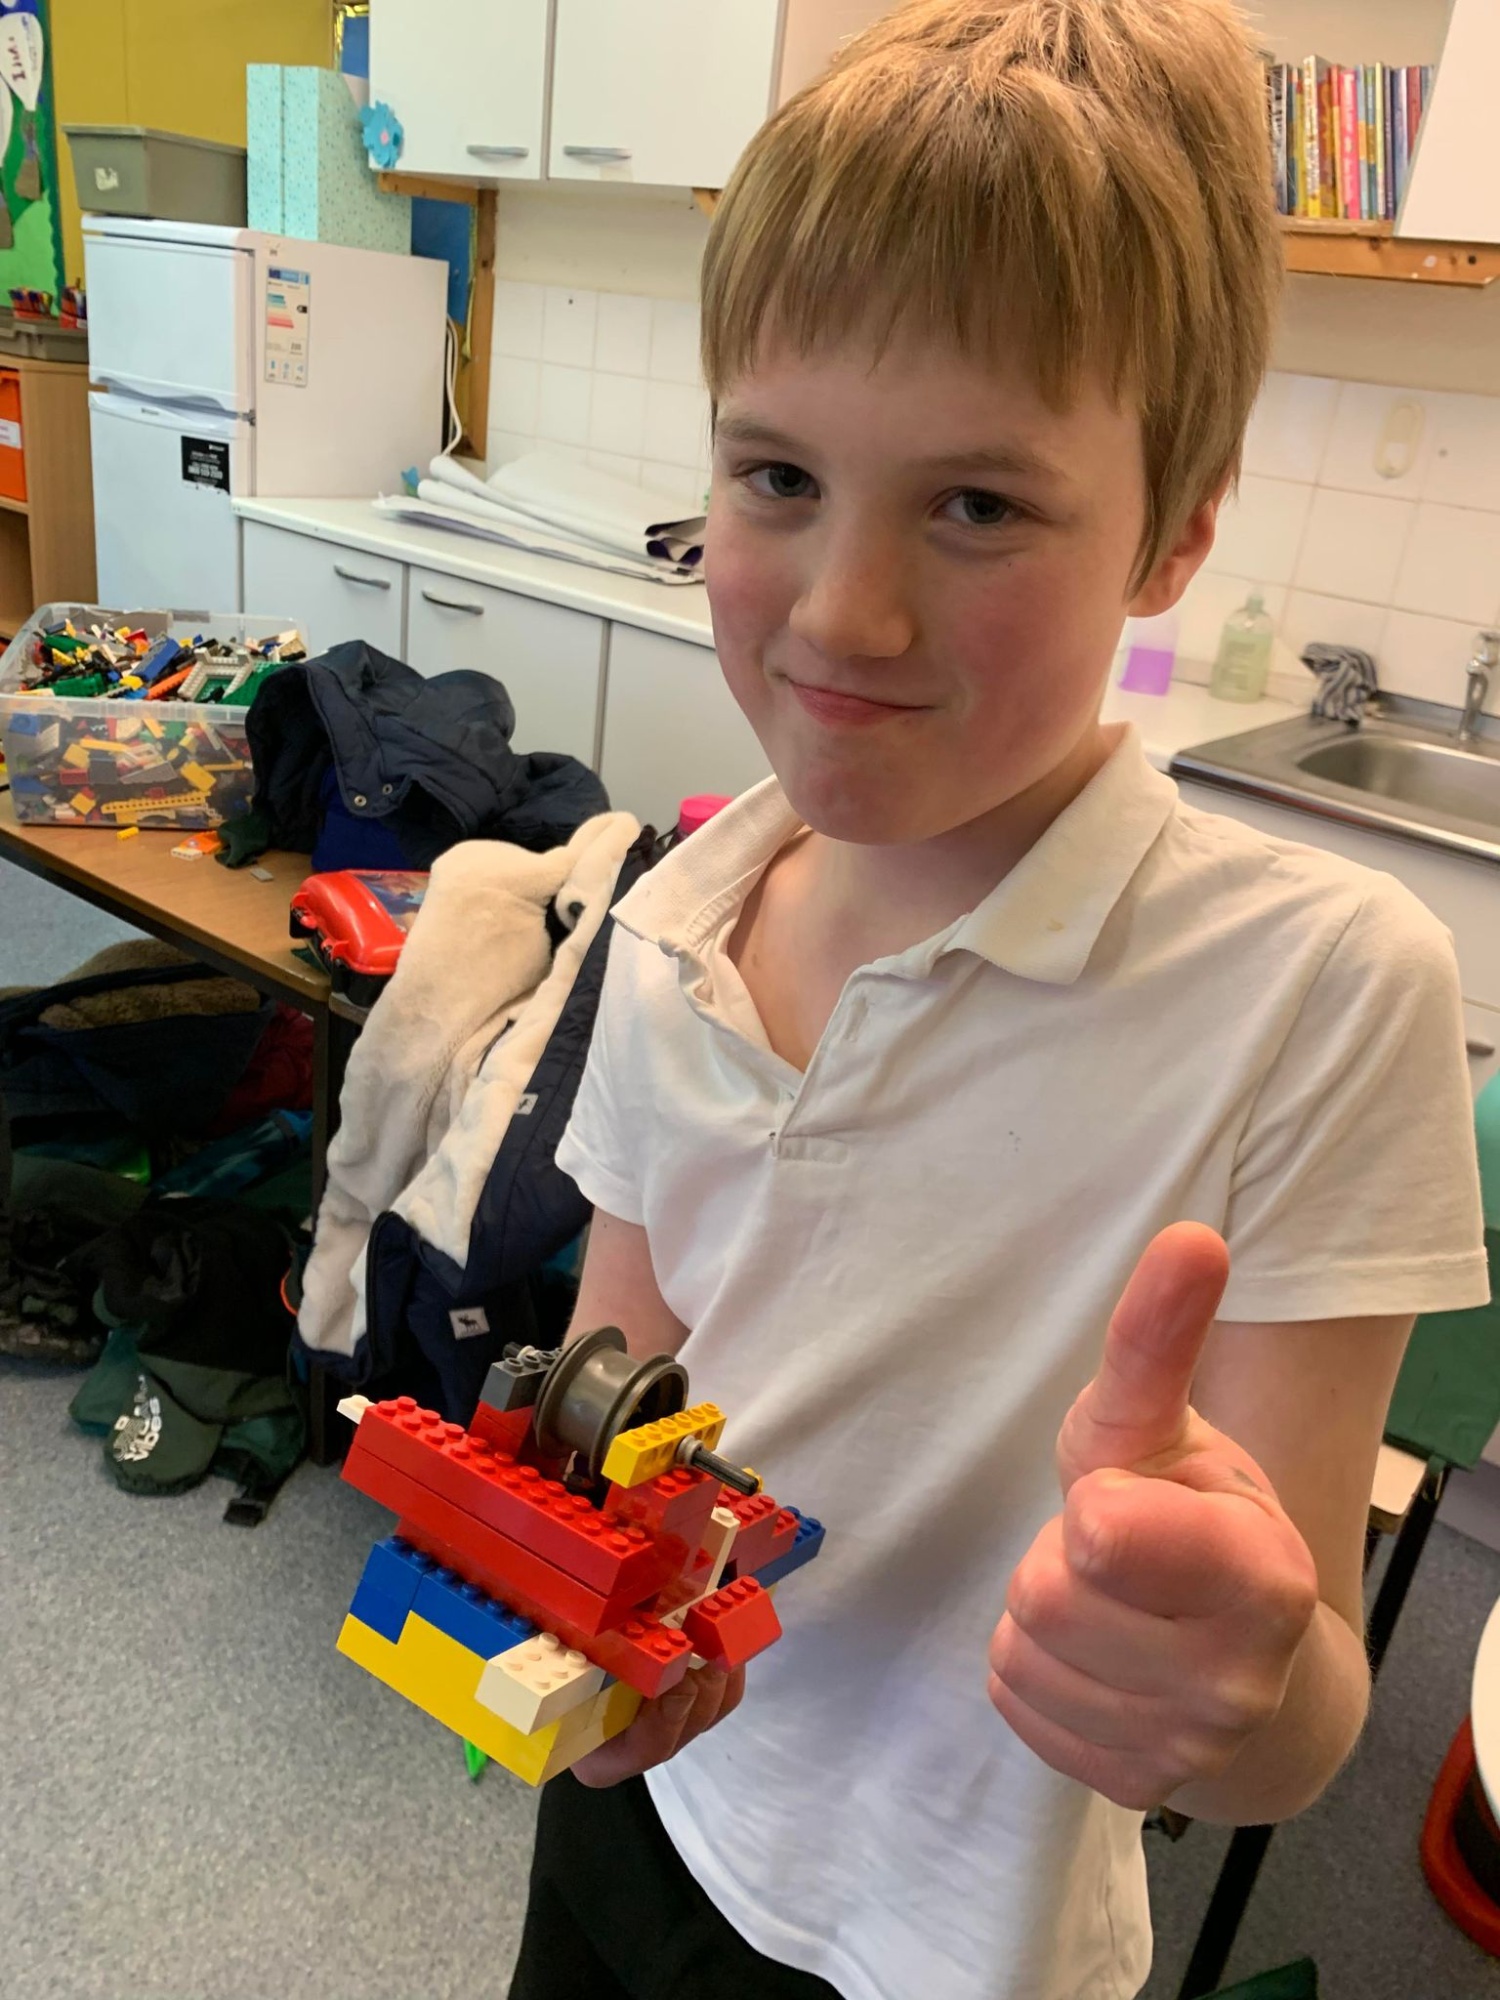 One child holding a Lego creation